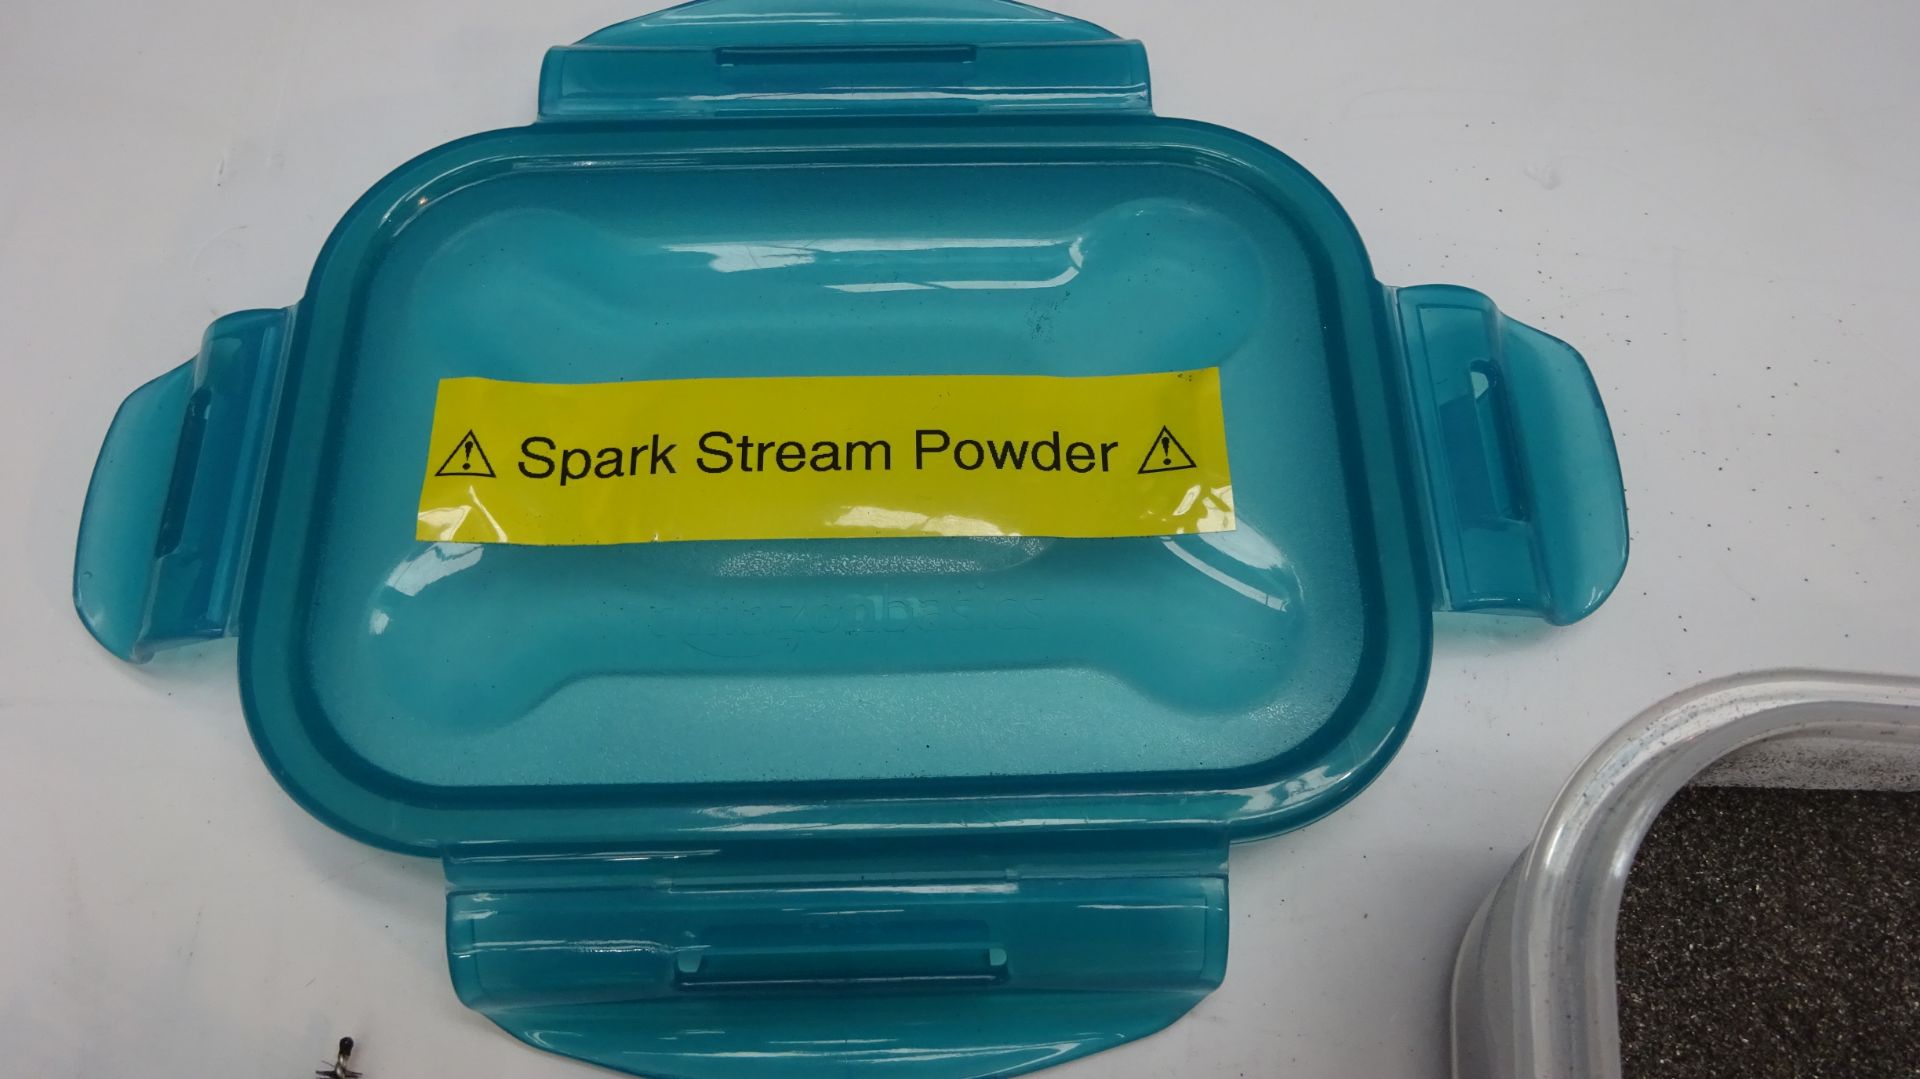 6 x Equinox Spark Stream ProLight c/w 6 x Remote Controls, Tub of Spark Stream Power, Cleaning - Image 16 of 20